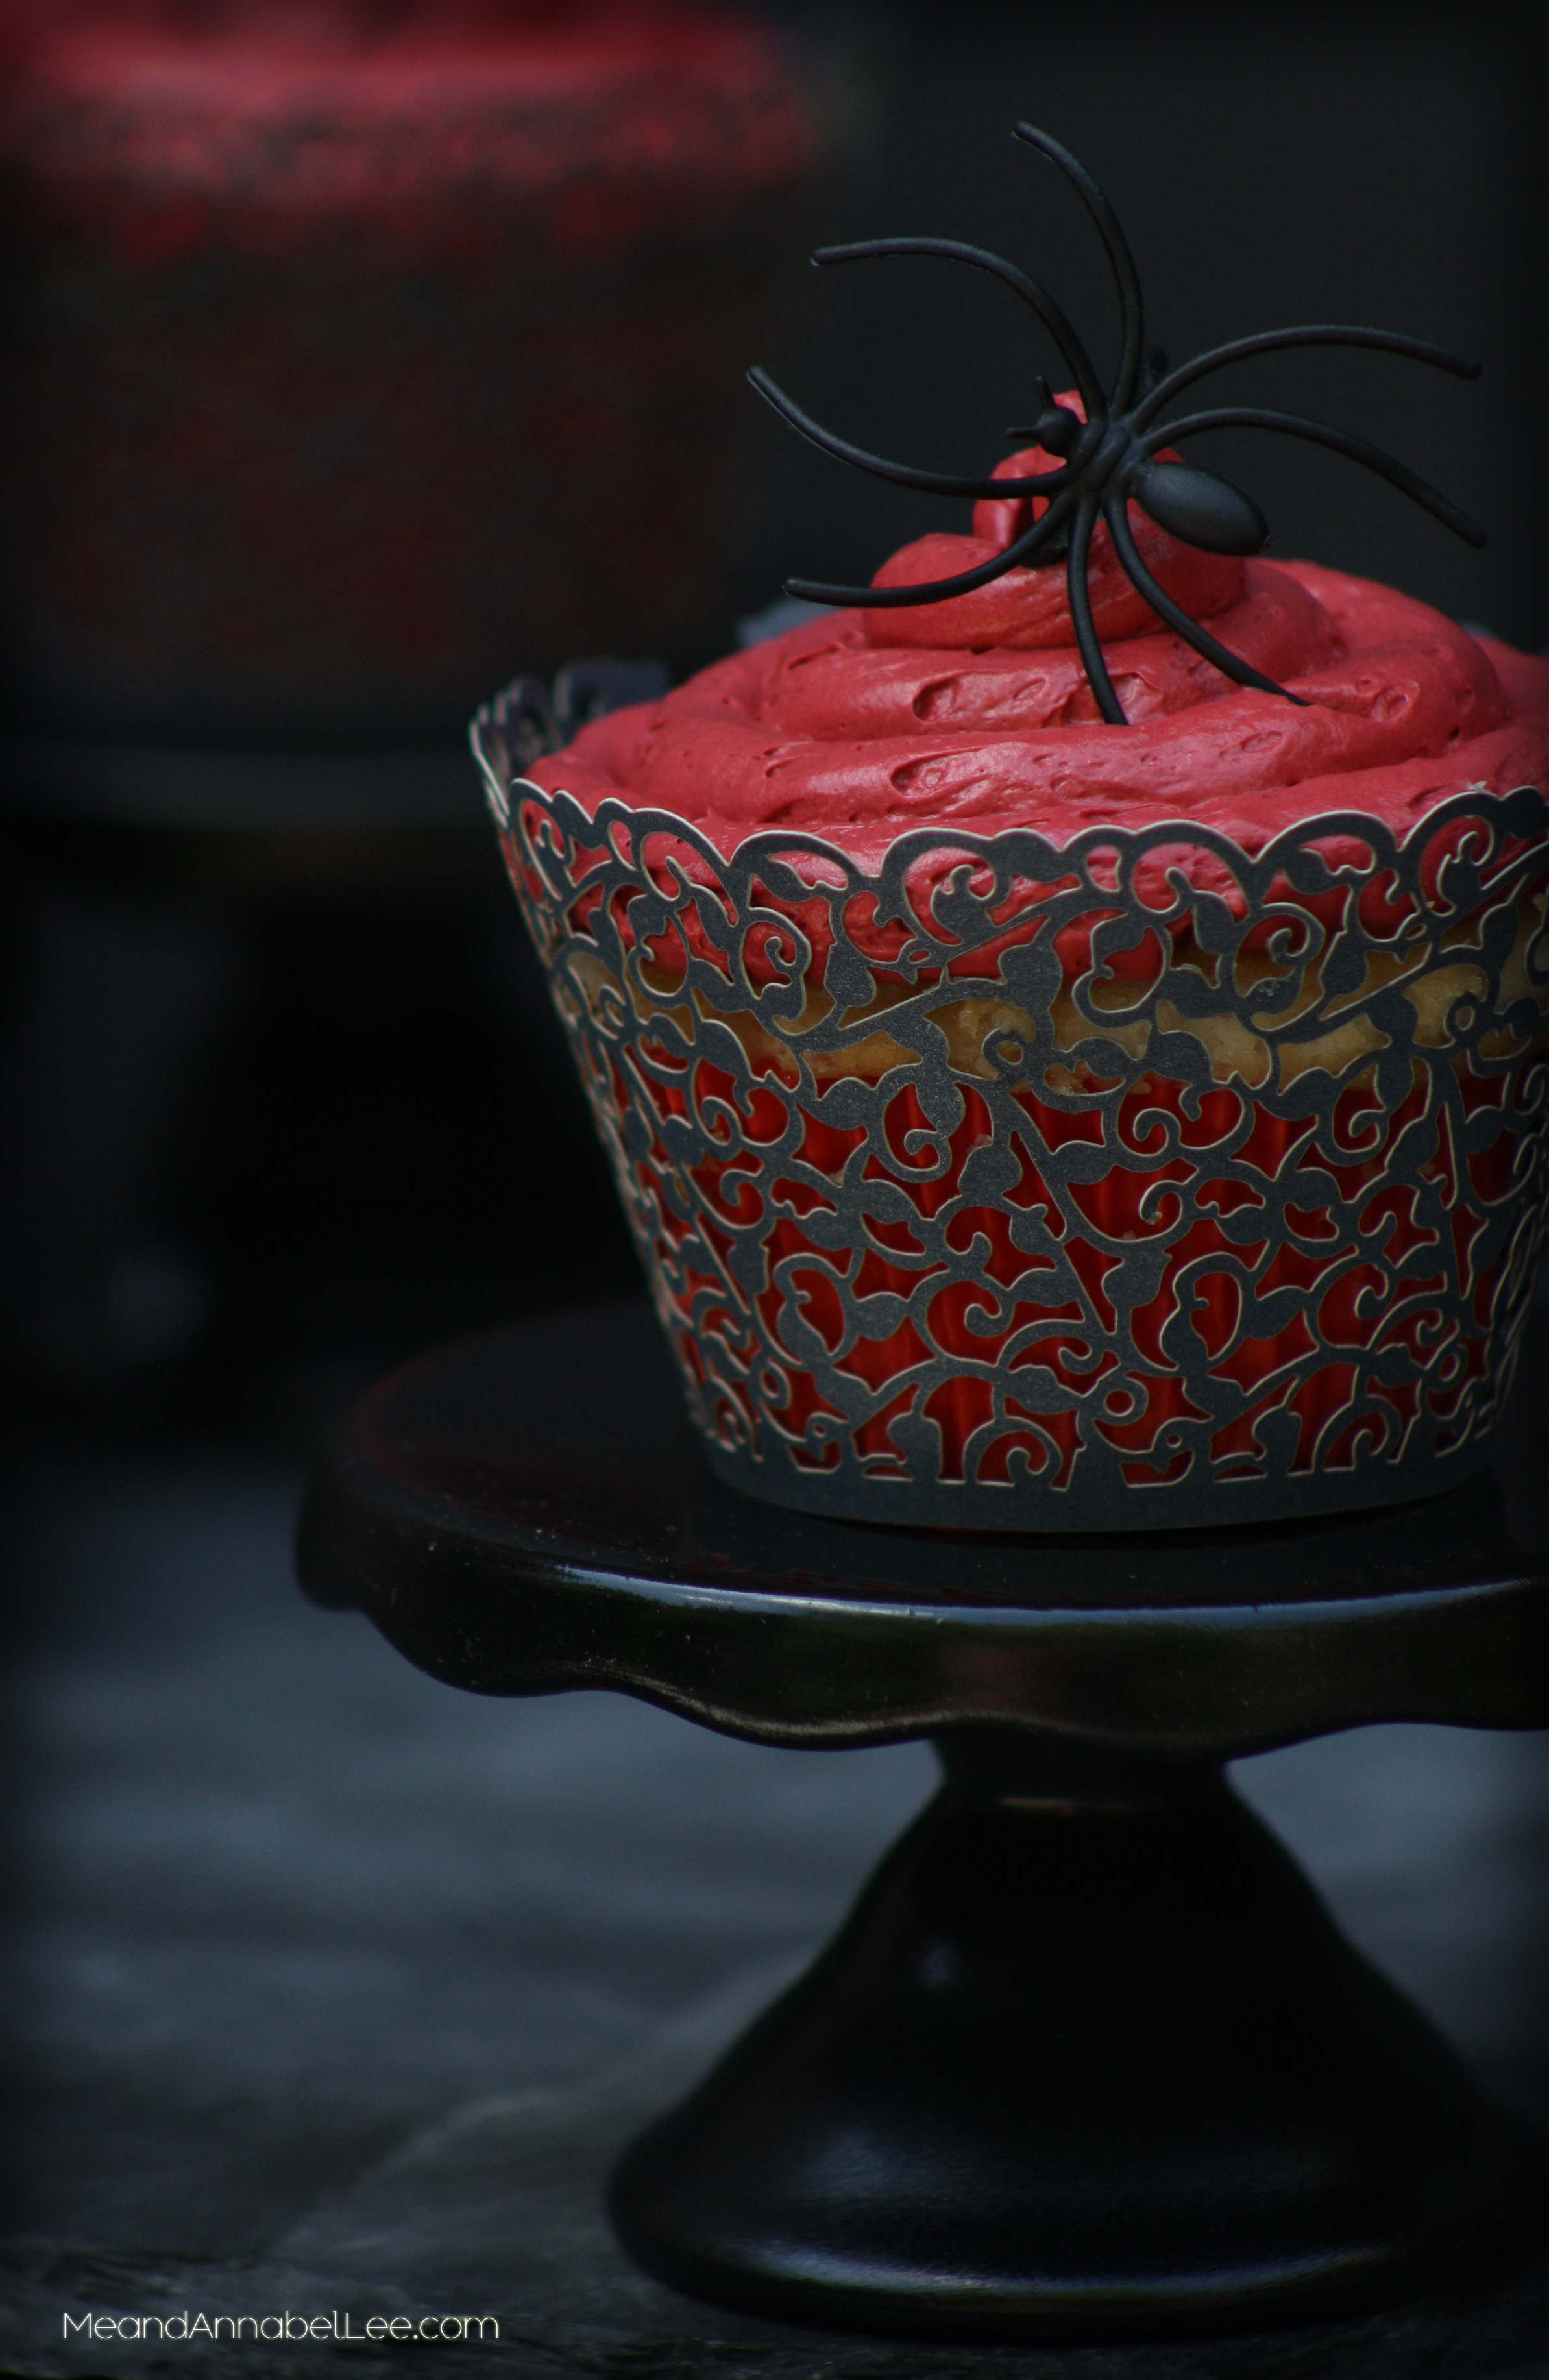 DIY Black Widow Cupcake Stands - Black Red Gothic Cupcakes - Vampire Style - Gothic Baking - Goth It yourself - www.MeandAnnabelLee.com